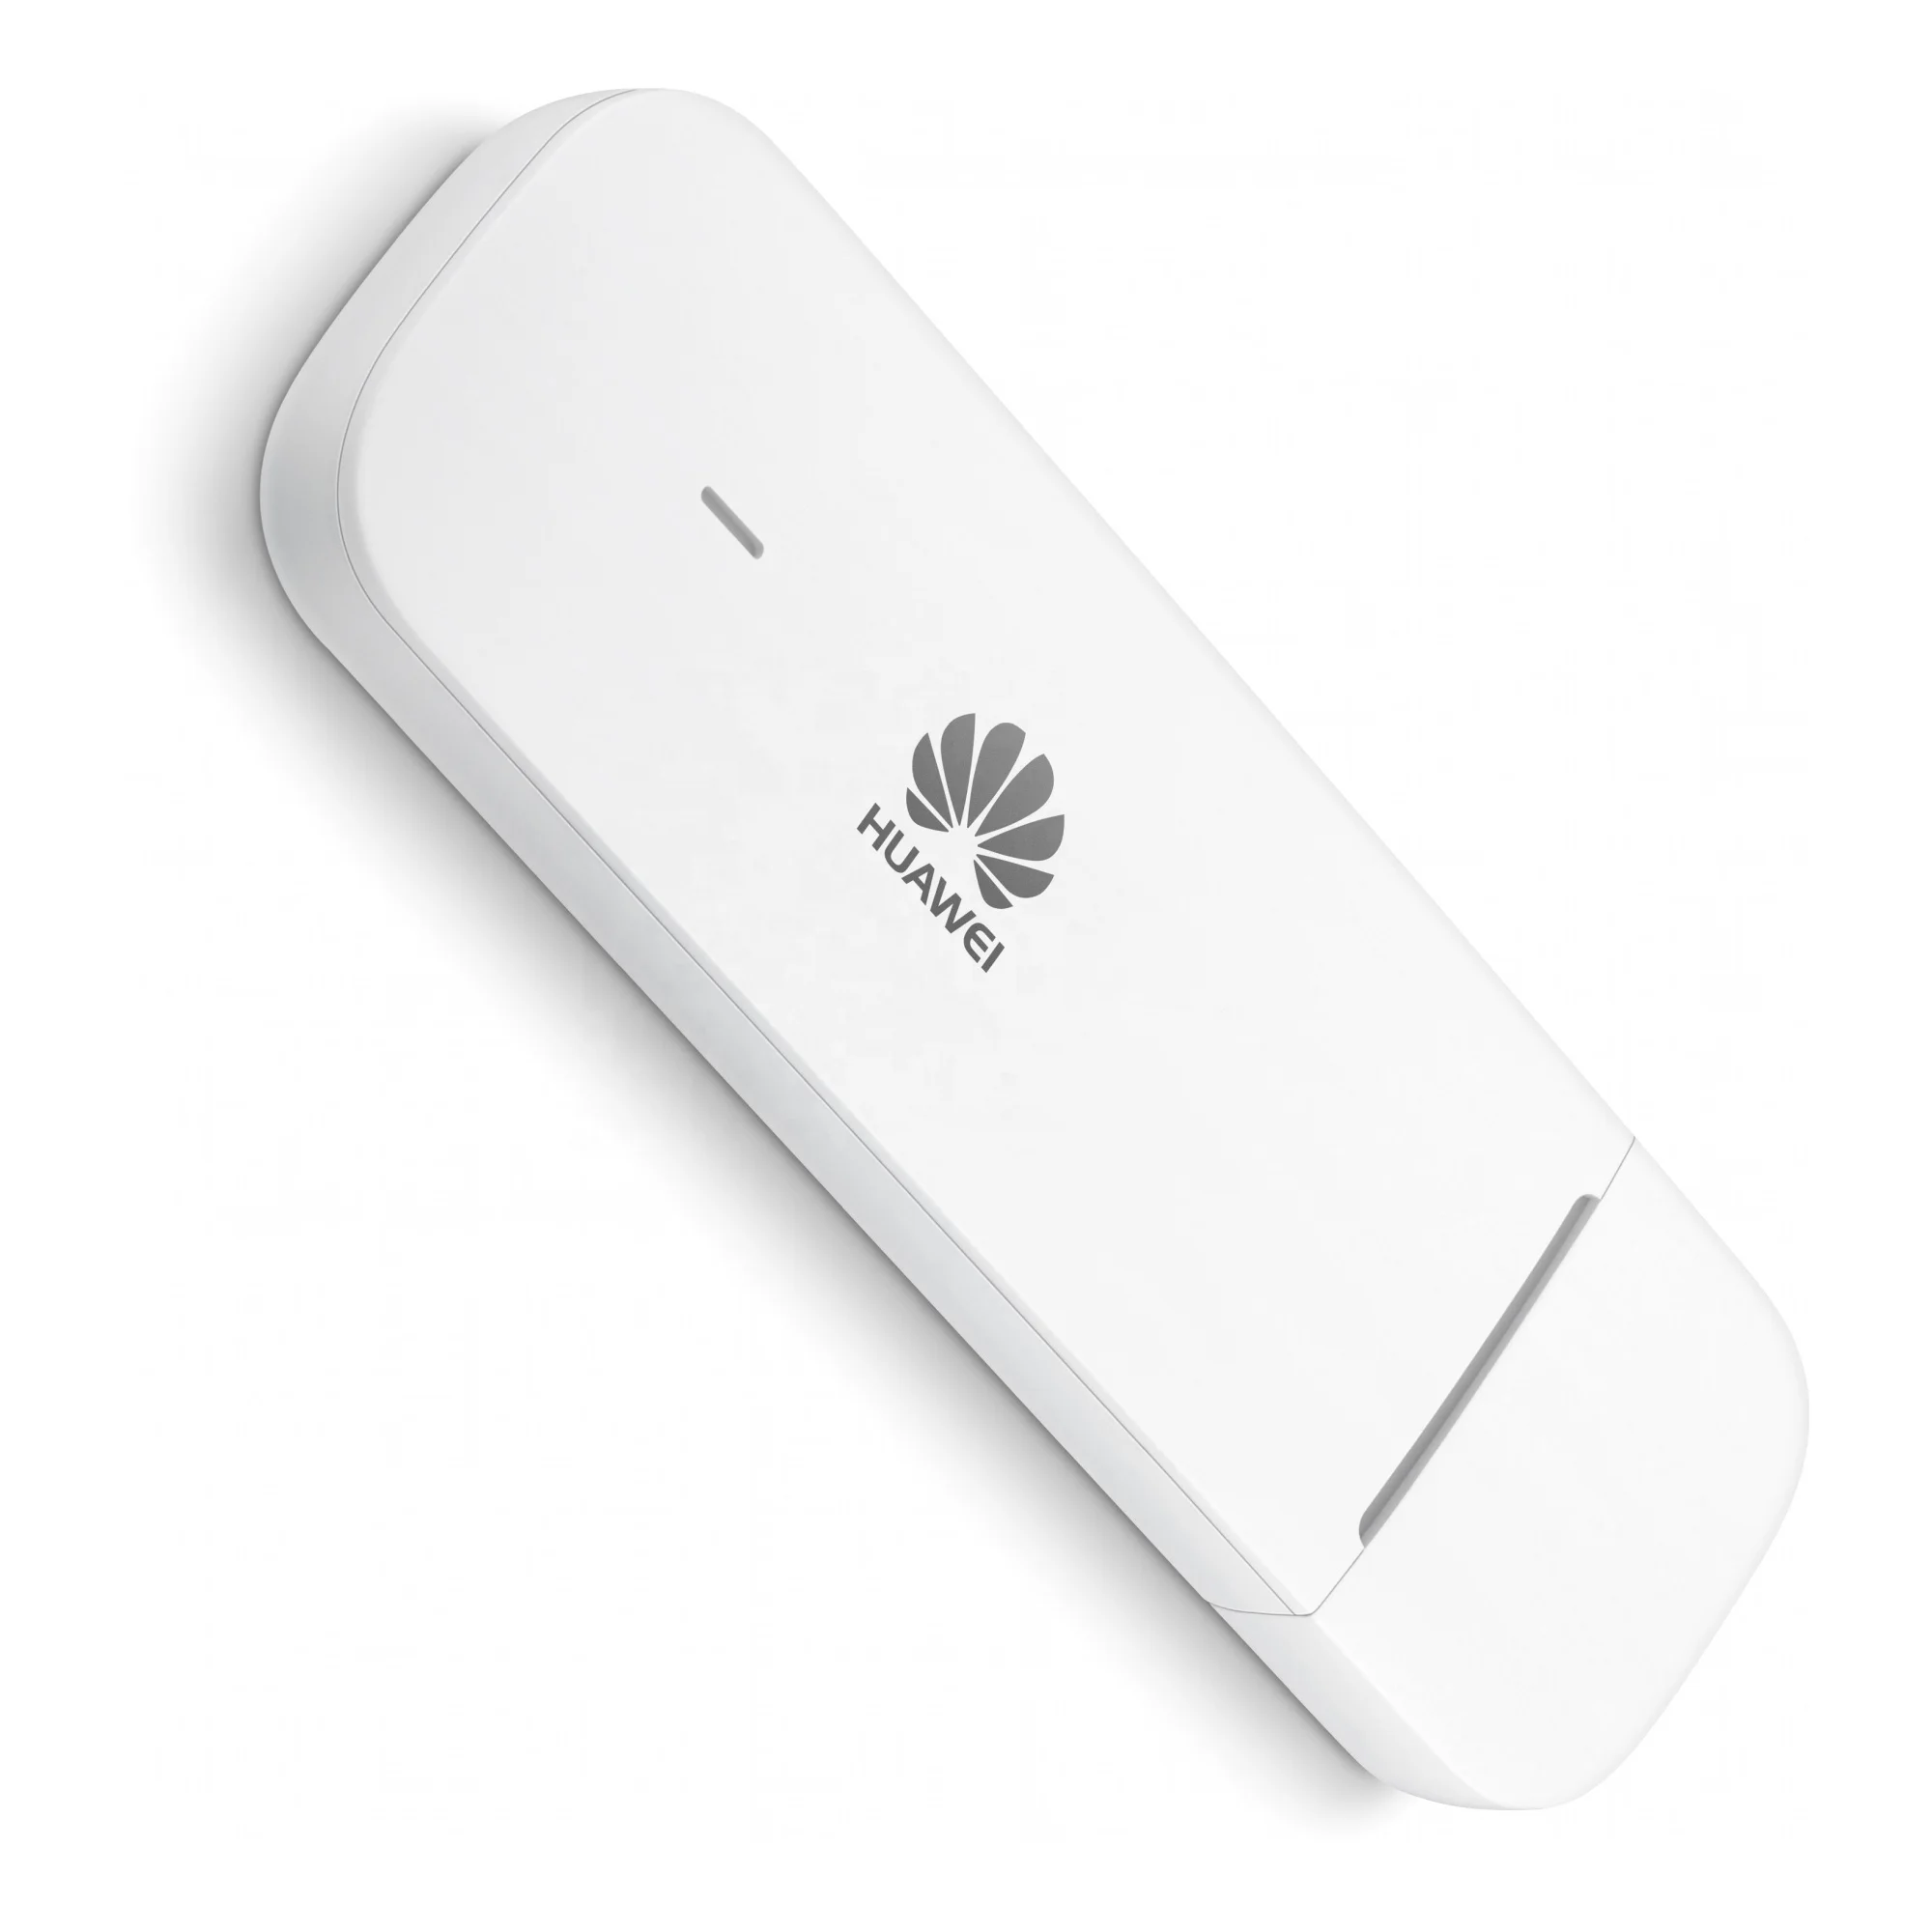 Unlocked Huawei E3372h-320 150Mbps 4G Mobile USB Stick 4g Modem Support 4G Bands 1/3/7/8/20 From m.alibaba.com